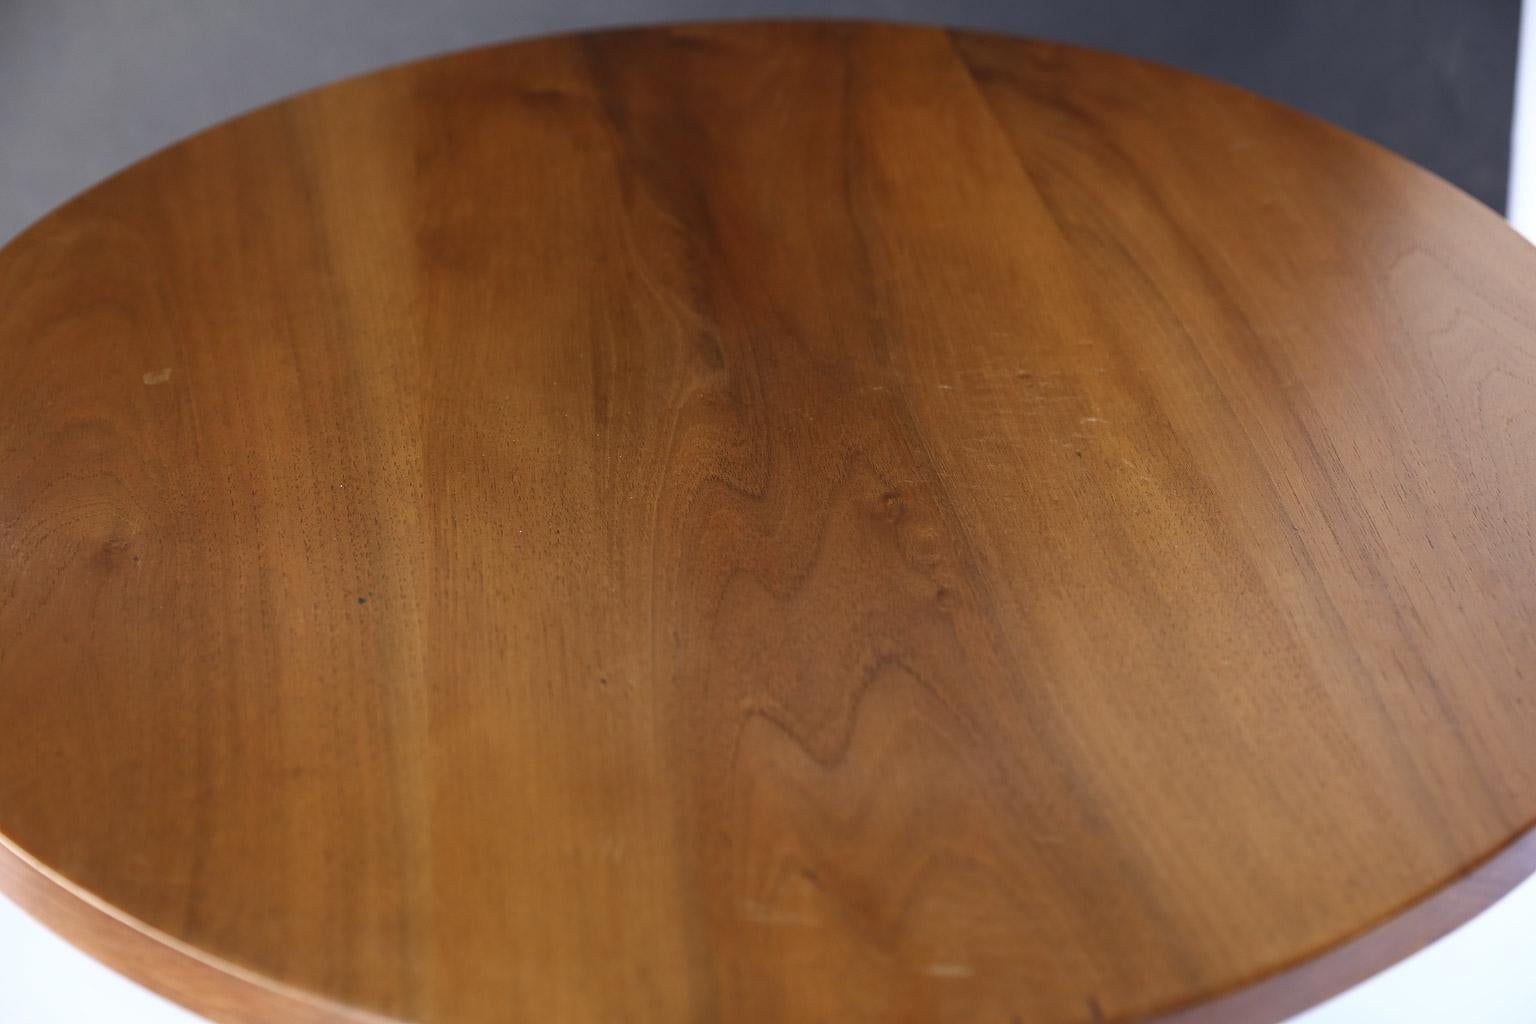 Made of walnut, this beautiful pedestal table is strong and sturdy. The table features a round top poised on a turned pedestal with tripod legs and a hand waxed finish.